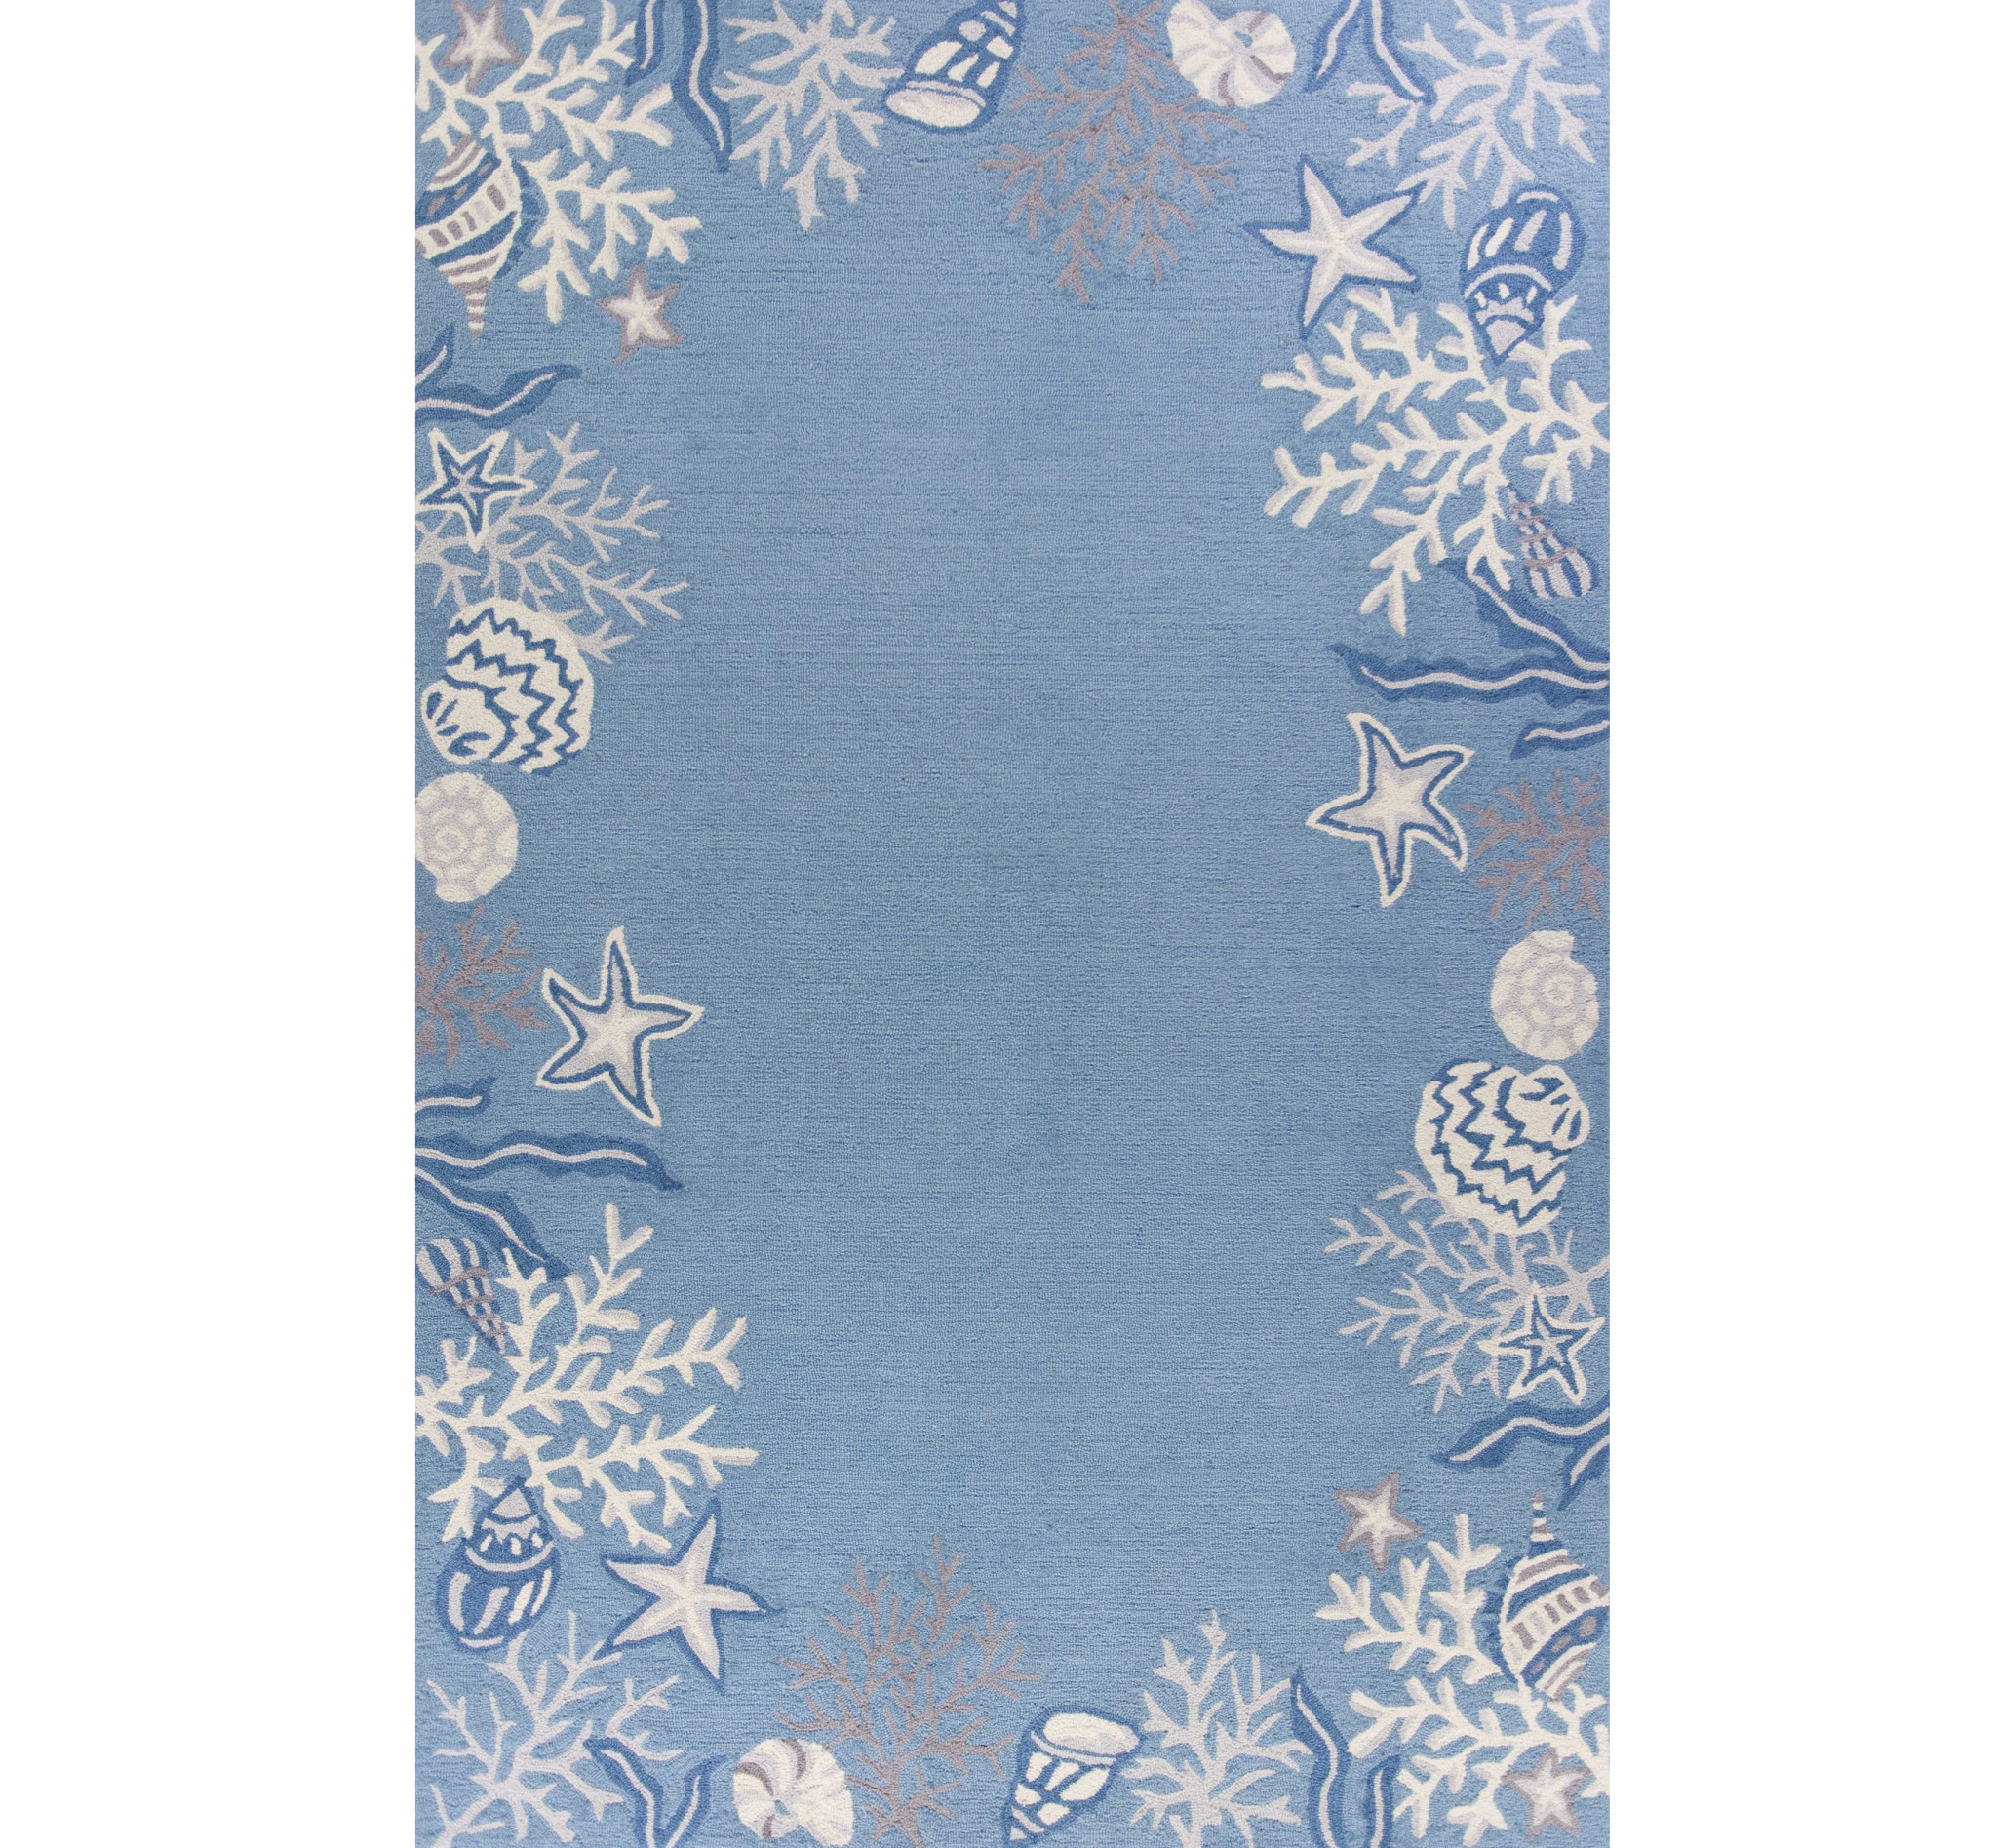 2'X4' Sea Blue Hand Hooked Bordered Coral Reef Indoor Accent Rug-353393-1